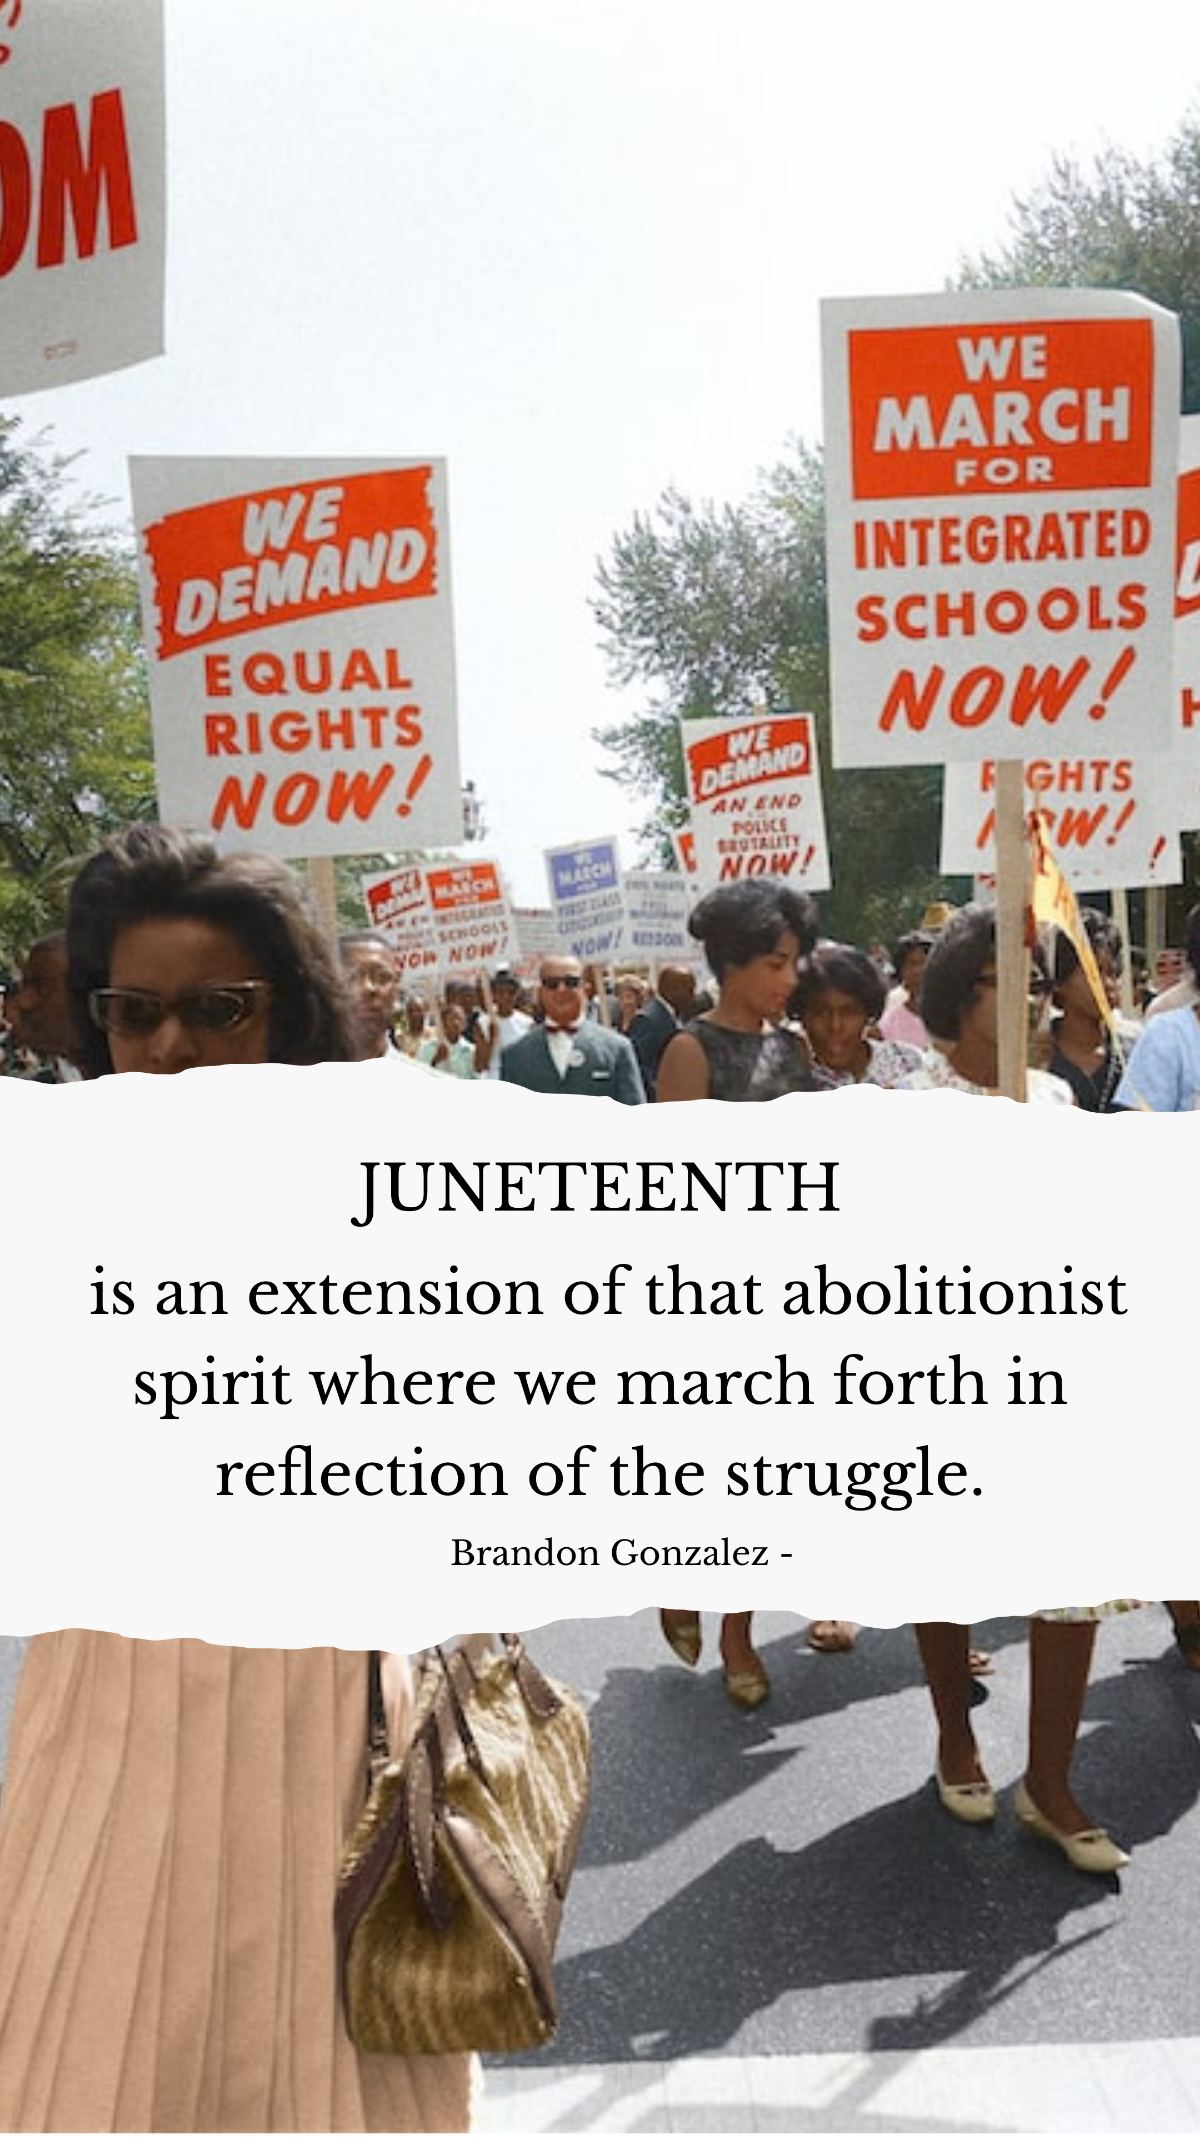 Brandon Gonzalez - Juneteenth is an extension of that abolitionist spirit where we march forth in reflection of the struggle.